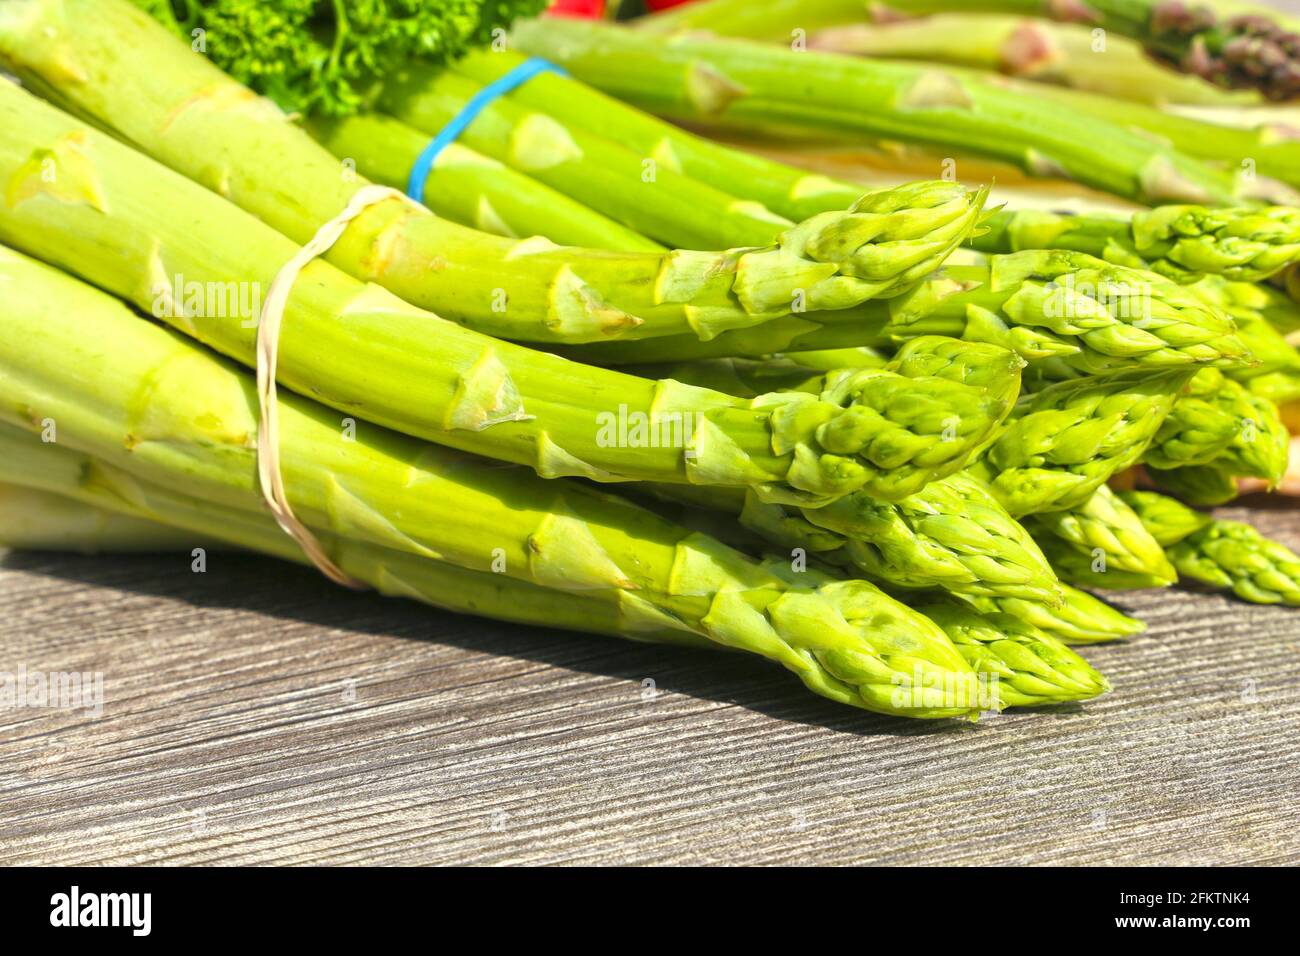 Green asparagus decorated on a rustic wooden table. Stock Photo